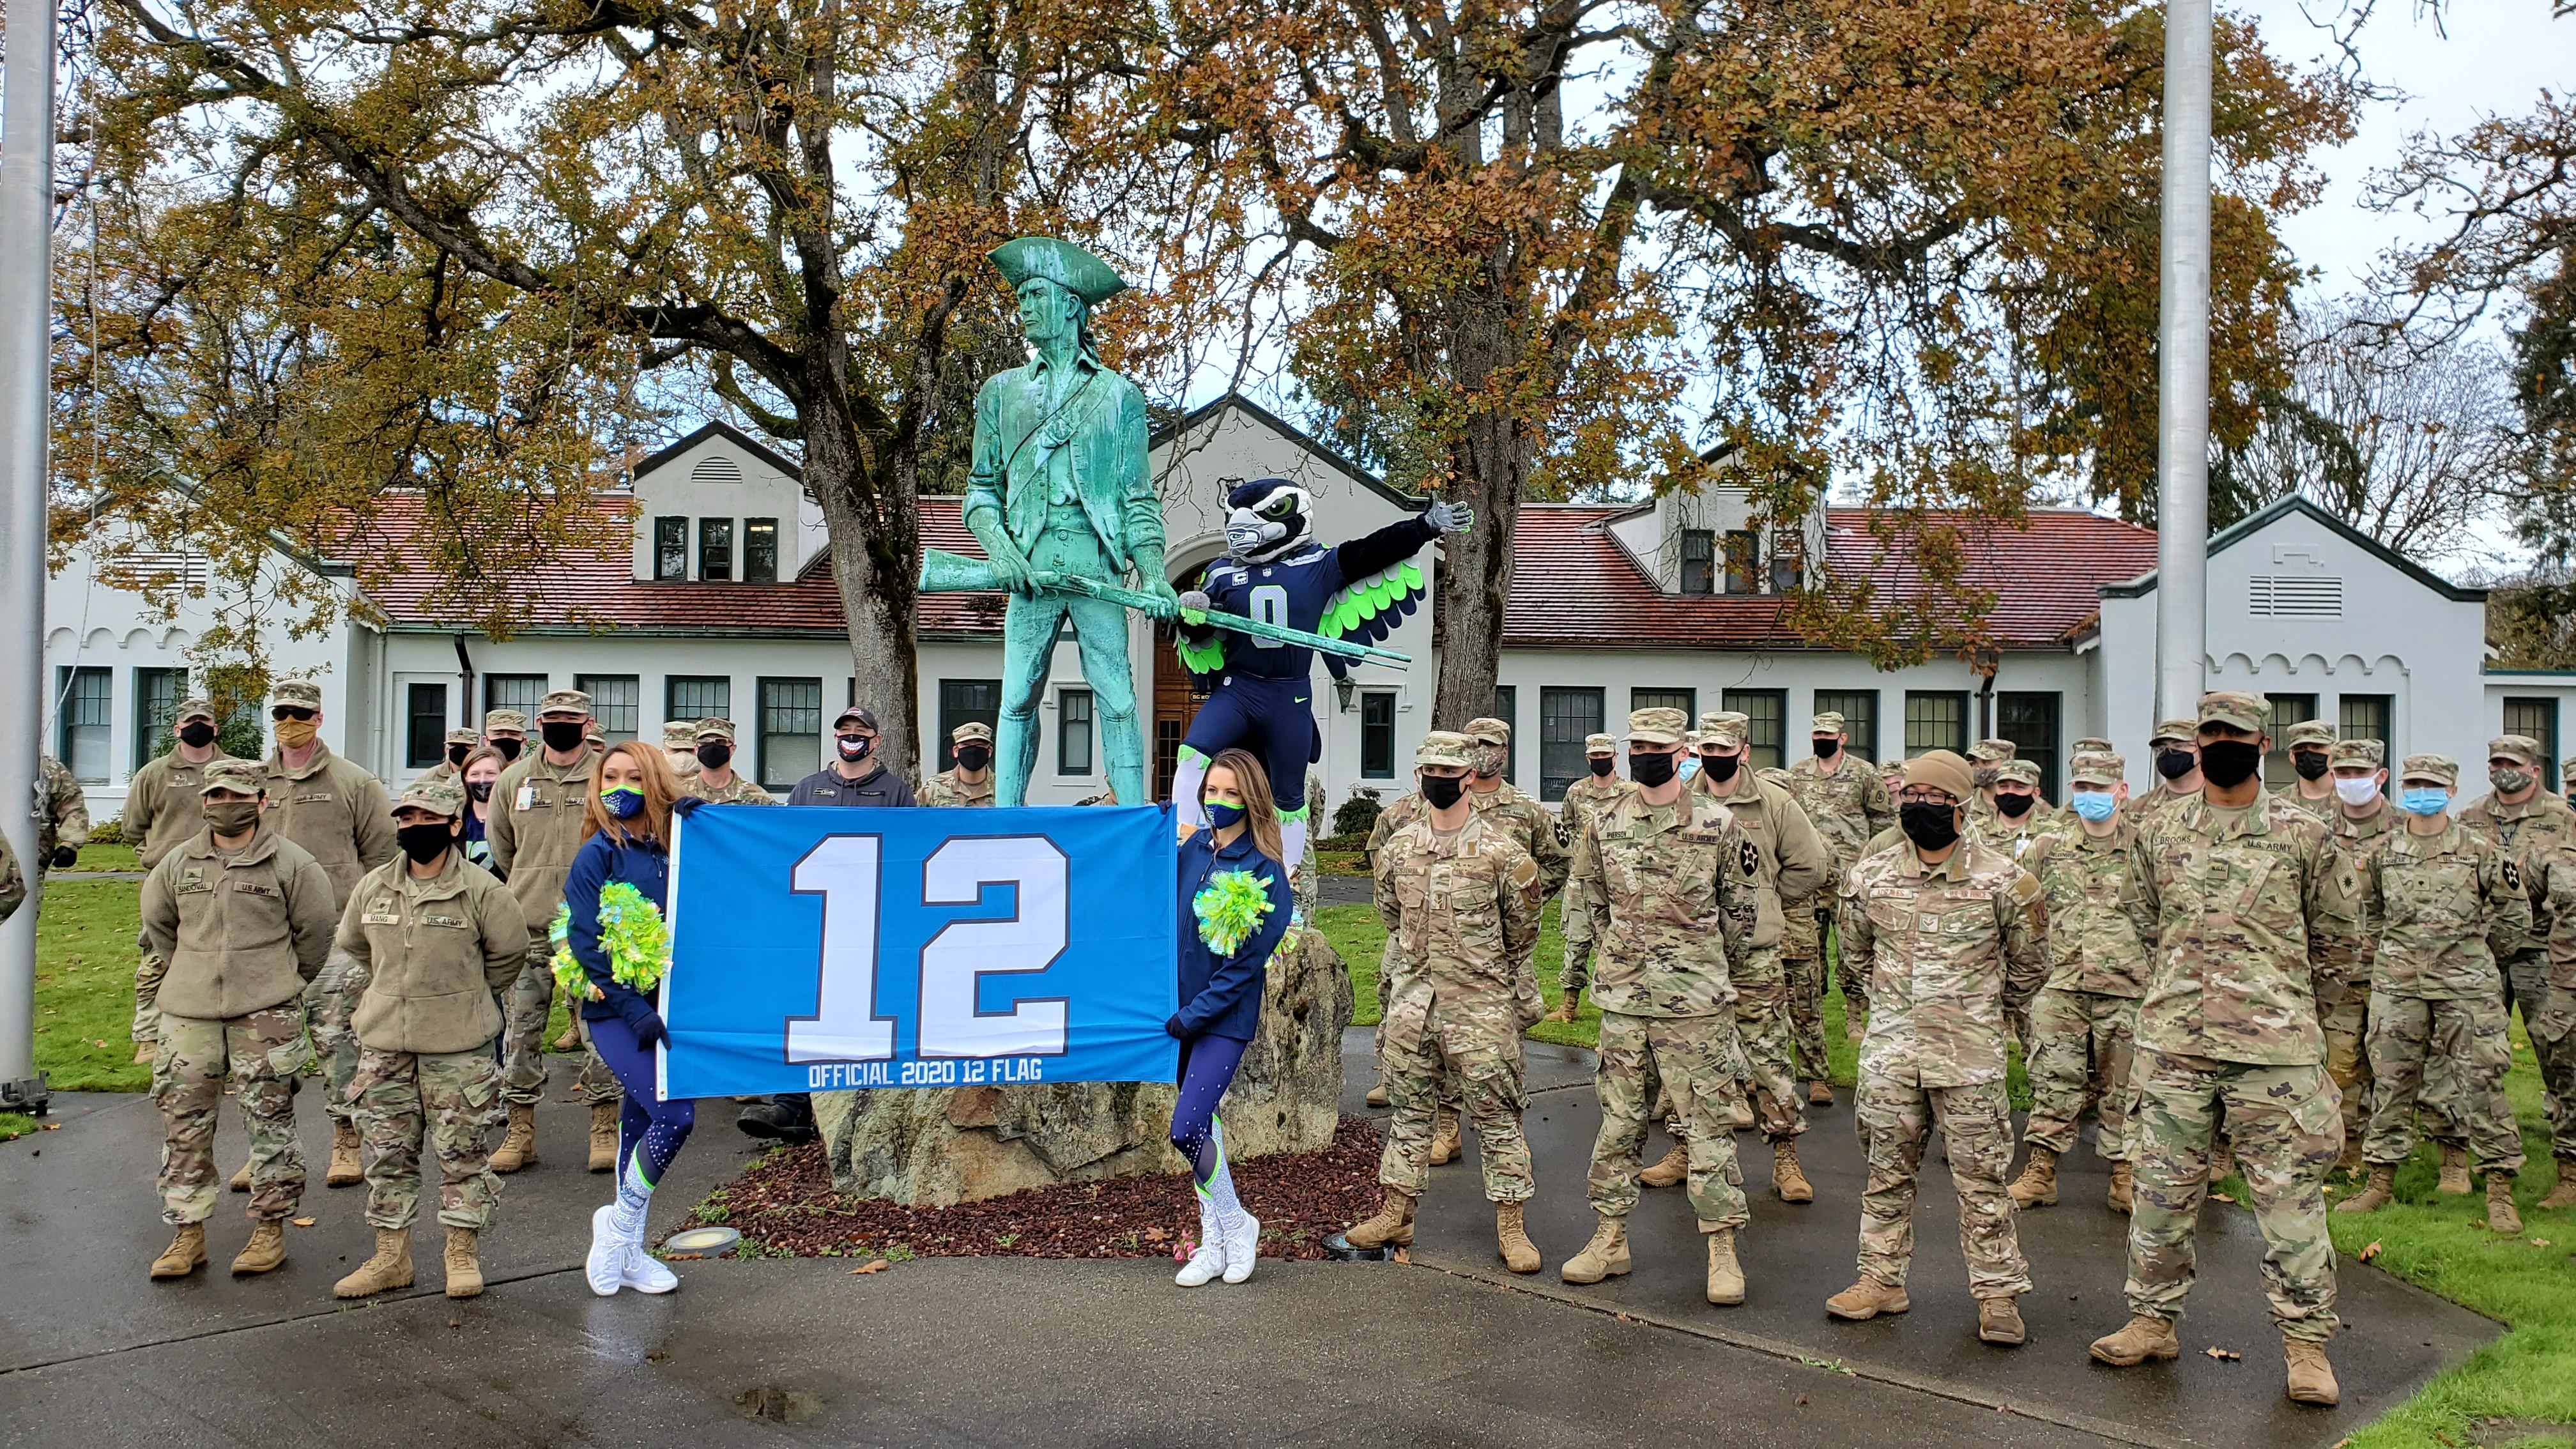 Seattle teams and National Guard relationship shows importance of rooting for the home team